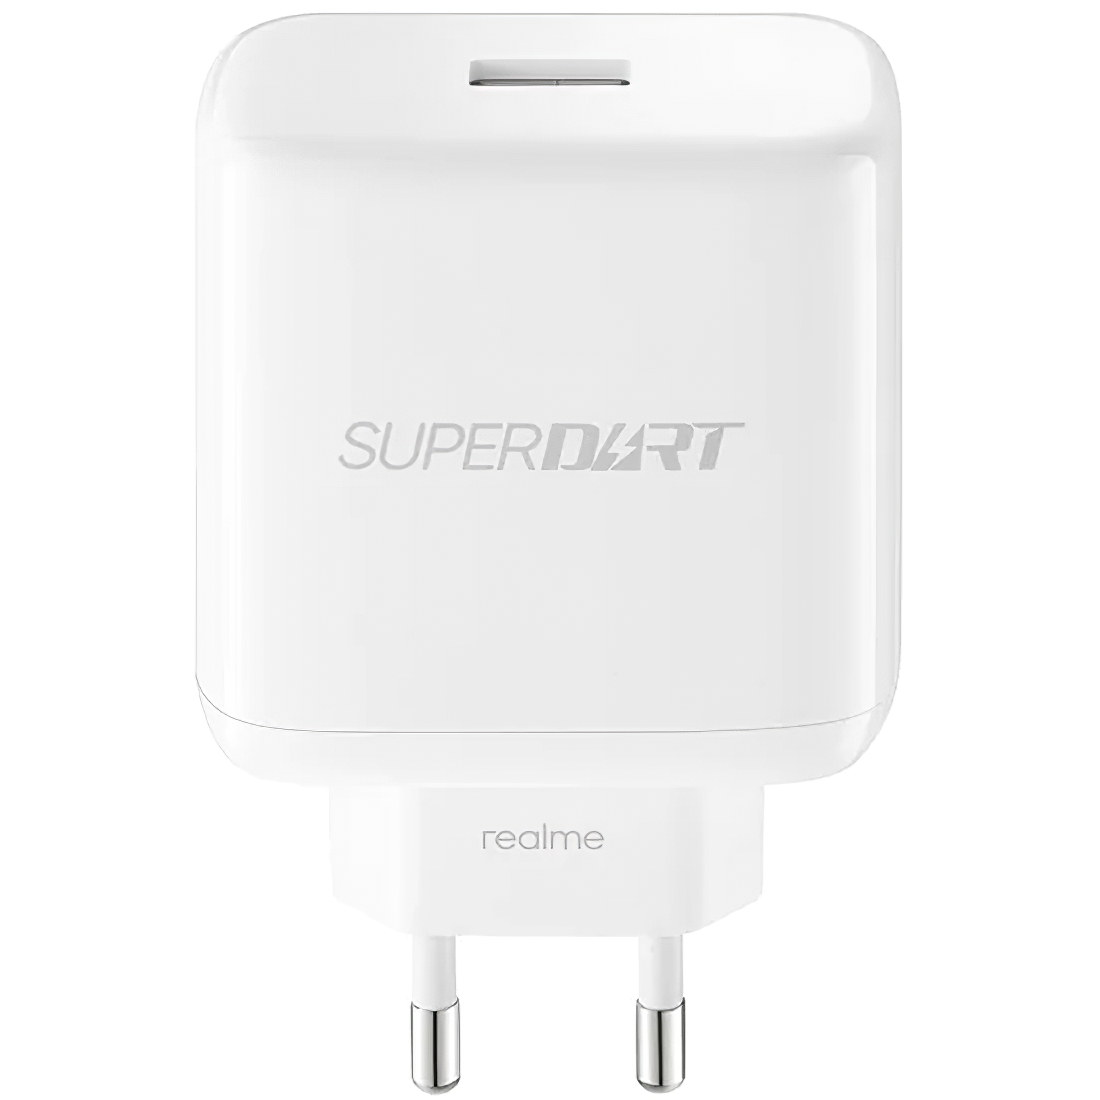 Realme 65W Travel Charger SuperDart, USB Type-C, White (Service Pack)